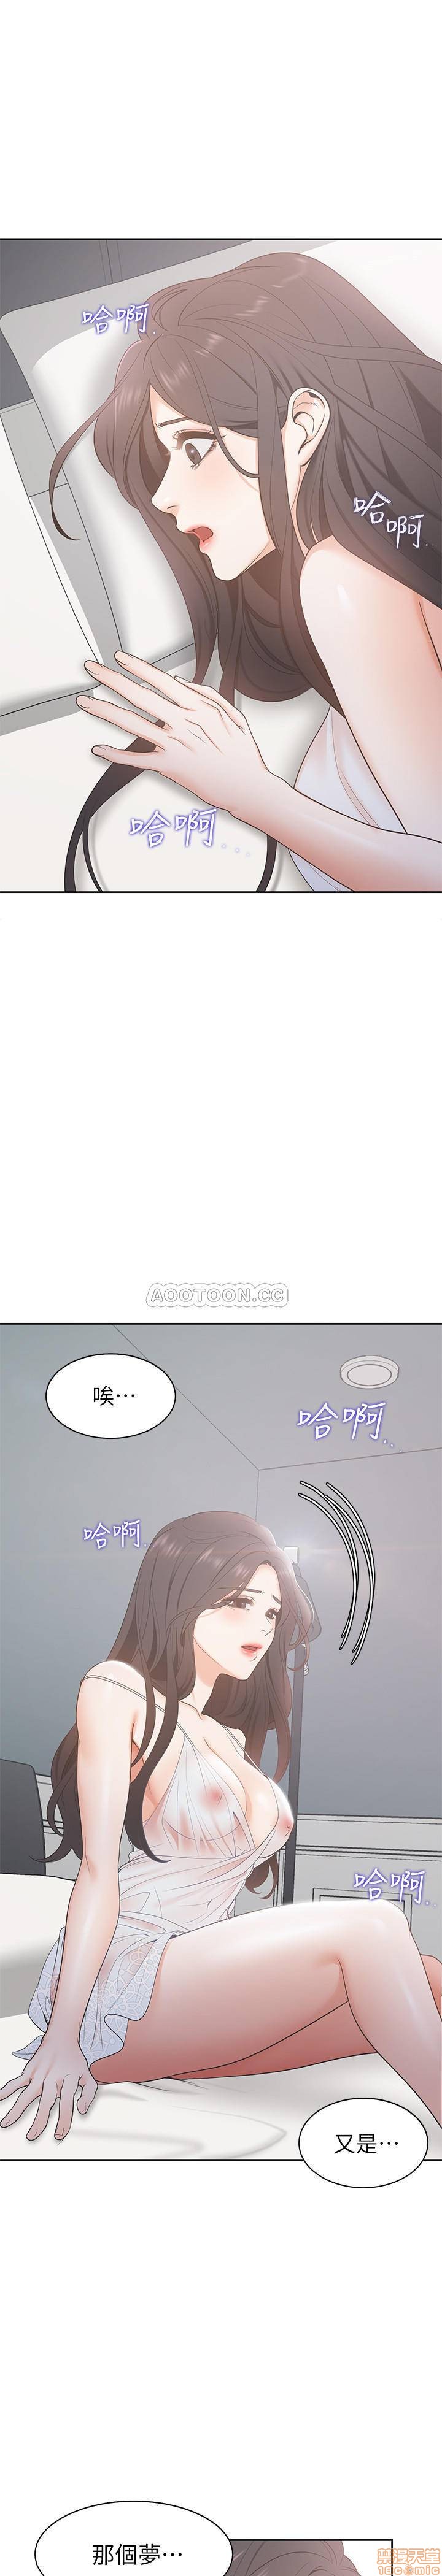 Thirst Raw - Chapter 4 Page 5